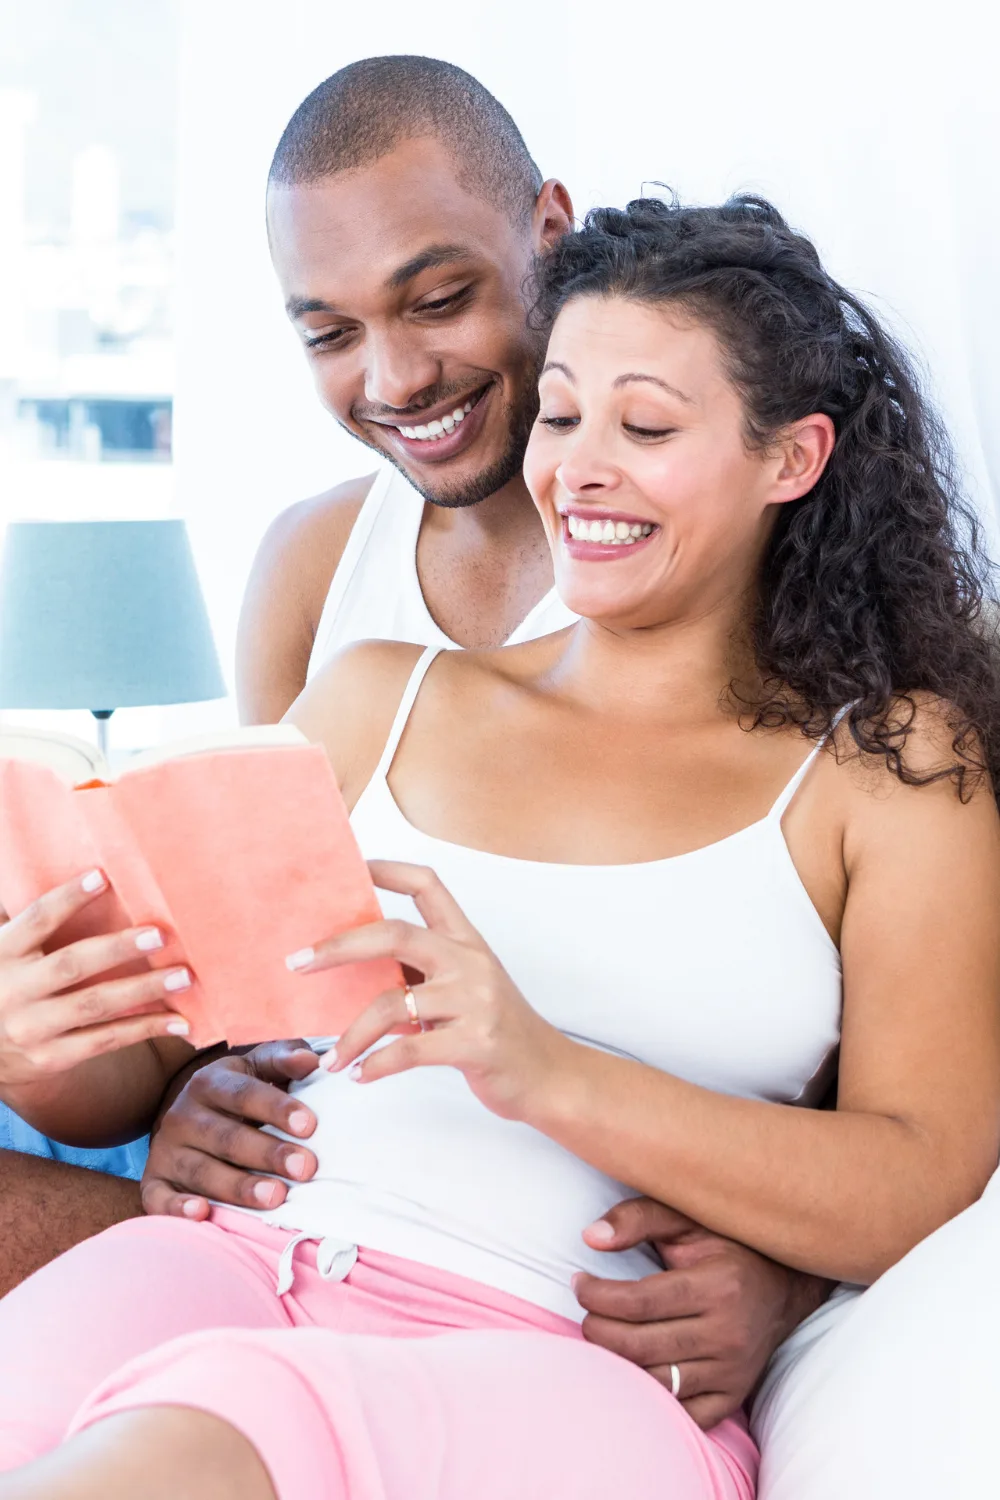 How To Make My Husband Attracted To Me While Pregnant